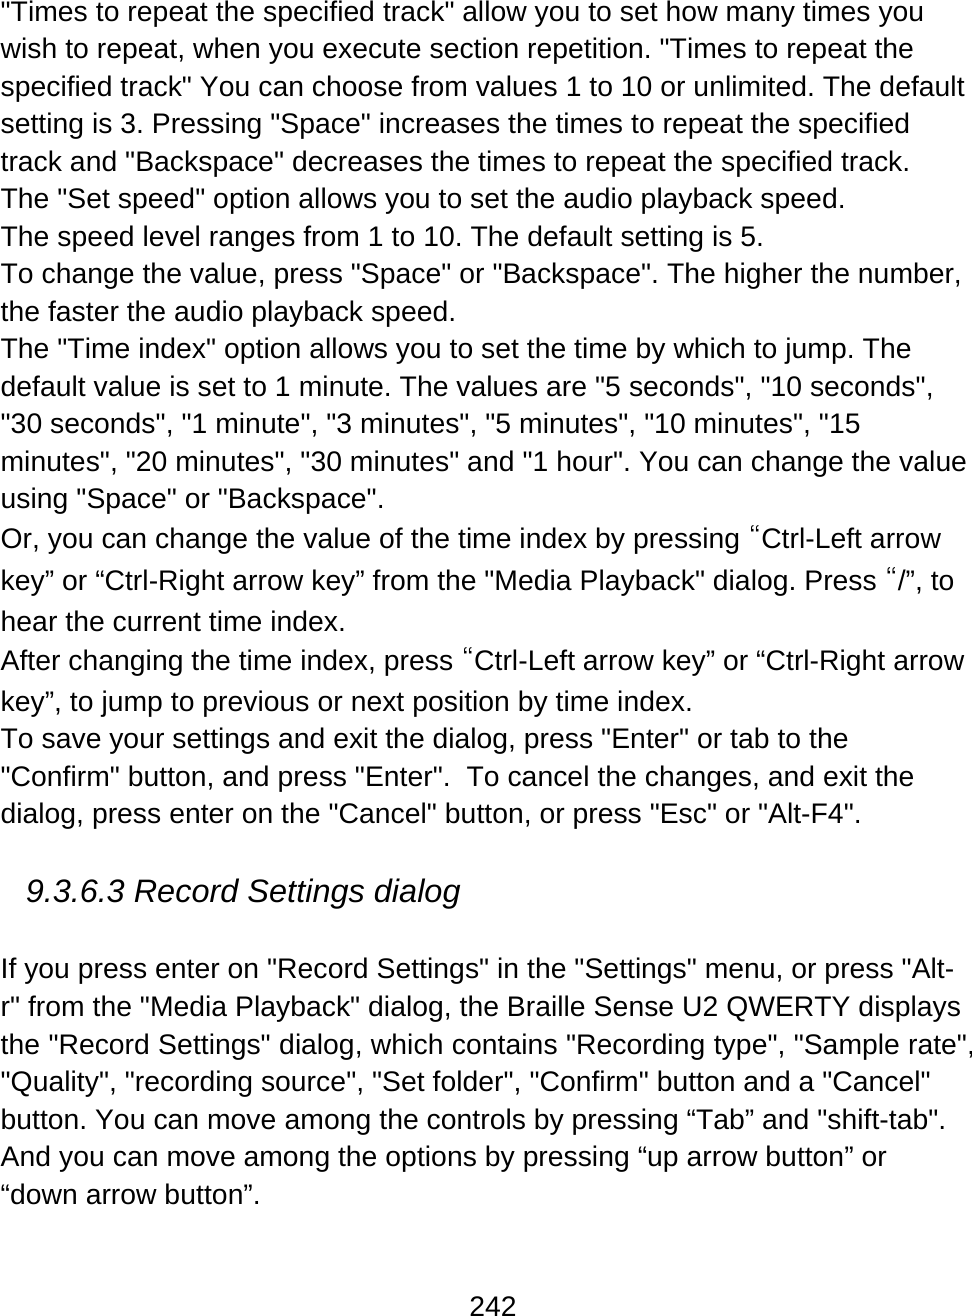 242  &quot;Times to repeat the specified track&quot; allow you to set how many times you wish to repeat, when you execute section repetition. &quot;Times to repeat the specified track&quot; You can choose from values 1 to 10 or unlimited. The default setting is 3. Pressing &quot;Space&quot; increases the times to repeat the specified track and &quot;Backspace&quot; decreases the times to repeat the specified track. The &quot;Set speed&quot; option allows you to set the audio playback speed. The speed level ranges from 1 to 10. The default setting is 5. To change the value, press &quot;Space&quot; or &quot;Backspace&quot;. The higher the number, the faster the audio playback speed.  The &quot;Time index&quot; option allows you to set the time by which to jump. The default value is set to 1 minute. The values are &quot;5 seconds&quot;, &quot;10 seconds&quot;, &quot;30 seconds&quot;, &quot;1 minute&quot;, &quot;3 minutes&quot;, &quot;5 minutes&quot;, &quot;10 minutes&quot;, &quot;15 minutes&quot;, &quot;20 minutes&quot;, &quot;30 minutes&quot; and &quot;1 hour&quot;. You can change the value using &quot;Space&quot; or &quot;Backspace&quot;.  Or, you can change the value of the time index by pressing “Ctrl-Left arrow key” or “Ctrl-Right arrow key” from the &quot;Media Playback&quot; dialog. Press “/”, to hear the current time index. After changing the time index, press “Ctrl-Left arrow key” or “Ctrl-Right arrow key”, to jump to previous or next position by time index.  To save your settings and exit the dialog, press &quot;Enter&quot; or tab to the &quot;Confirm&quot; button, and press &quot;Enter&quot;.  To cancel the changes, and exit the dialog, press enter on the &quot;Cancel&quot; button, or press &quot;Esc&quot; or &quot;Alt-F4&quot;.  9.3.6.3 Record Settings dialog   If you press enter on &quot;Record Settings&quot; in the &quot;Settings&quot; menu, or press &quot;Alt-r&quot; from the &quot;Media Playback&quot; dialog, the Braille Sense U2 QWERTY displays the &quot;Record Settings&quot; dialog, which contains &quot;Recording type&quot;, &quot;Sample rate&quot;, &quot;Quality&quot;, &quot;recording source&quot;, &quot;Set folder&quot;, &quot;Confirm&quot; button and a &quot;Cancel&quot; button. You can move among the controls by pressing “Tab” and &quot;shift-tab&quot;. And you can move among the options by pressing “up arrow button” or “down arrow button”. 